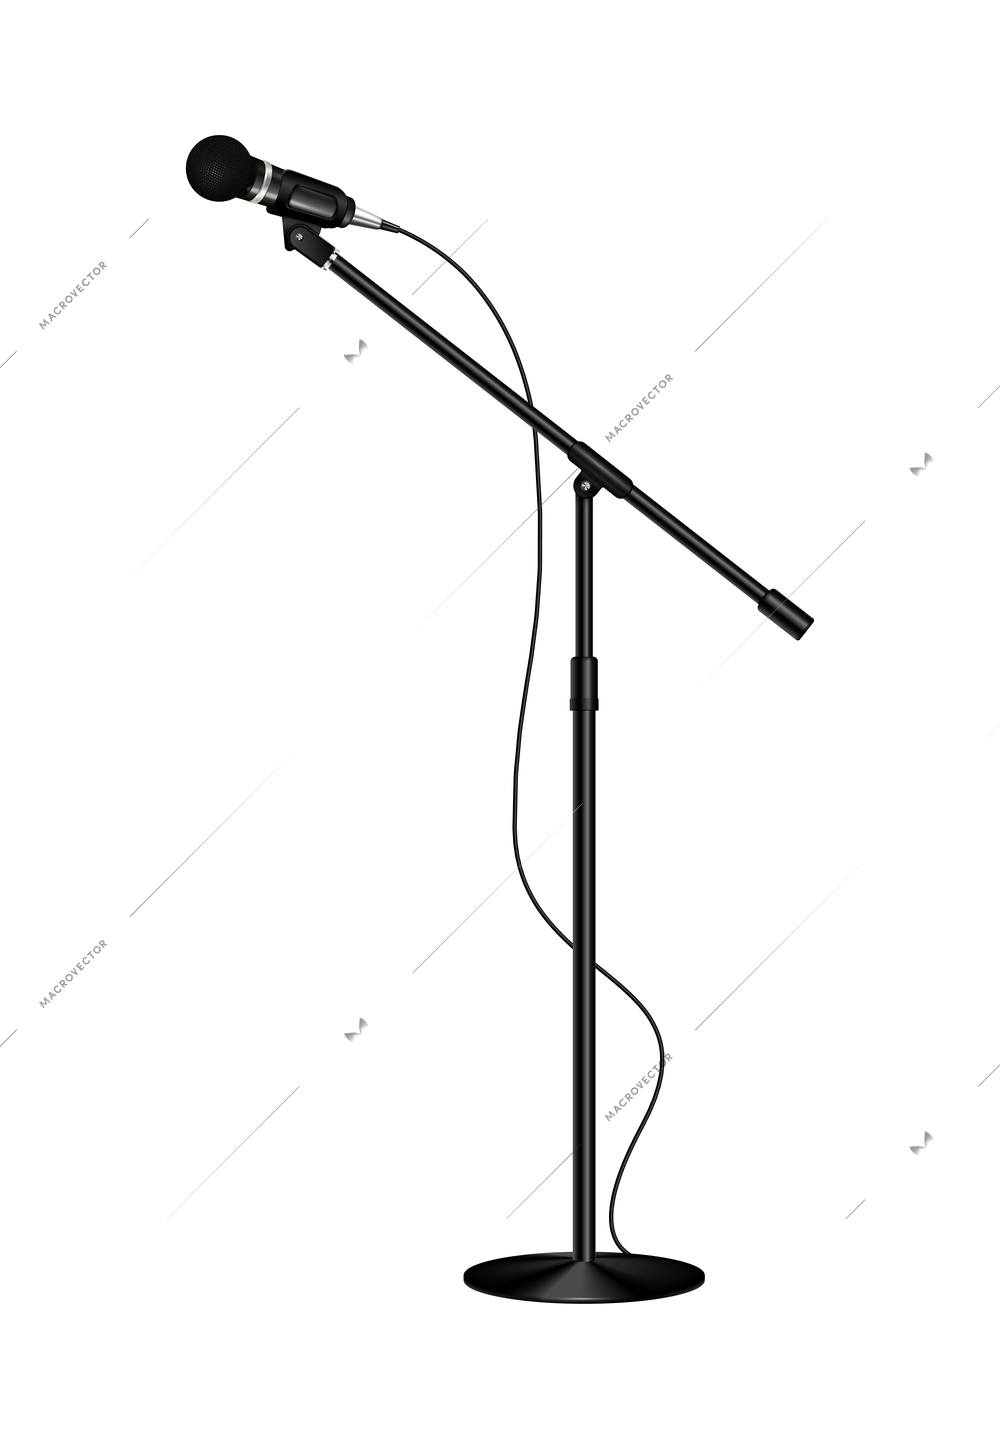 Professional microphone realistic composition with isolated image of audio recording mic on stand vector illustration